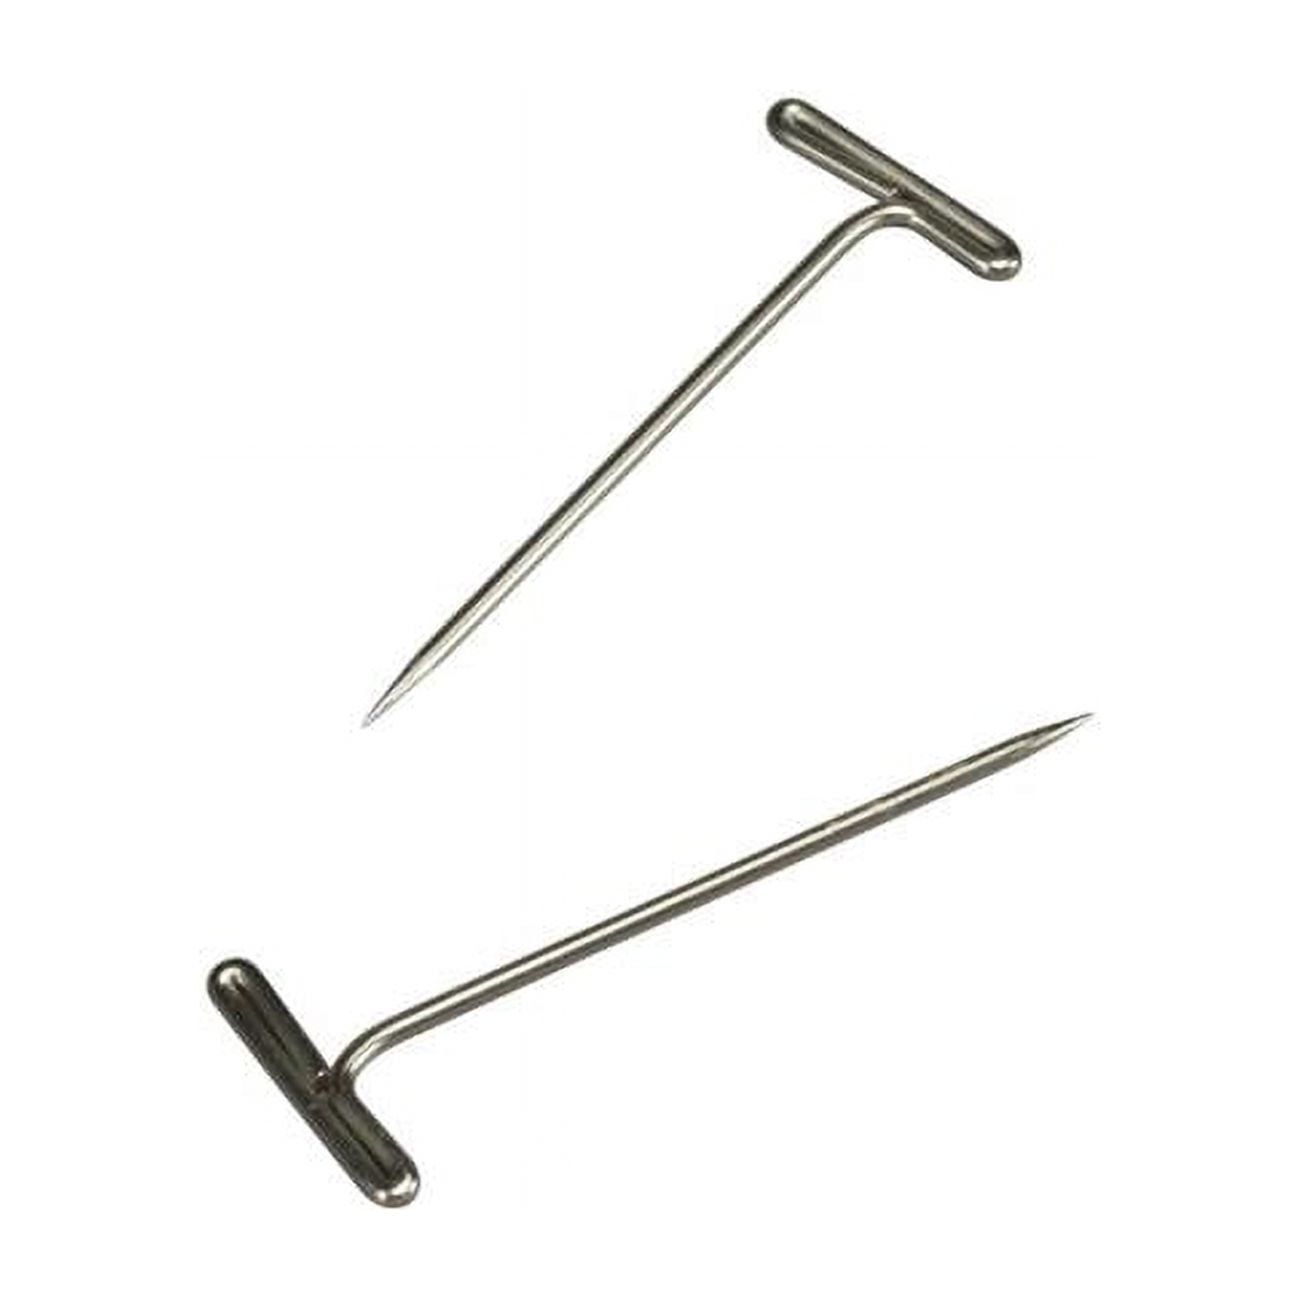 T Pins - Nickel Plated Hardened Steel T Pins For Macrame